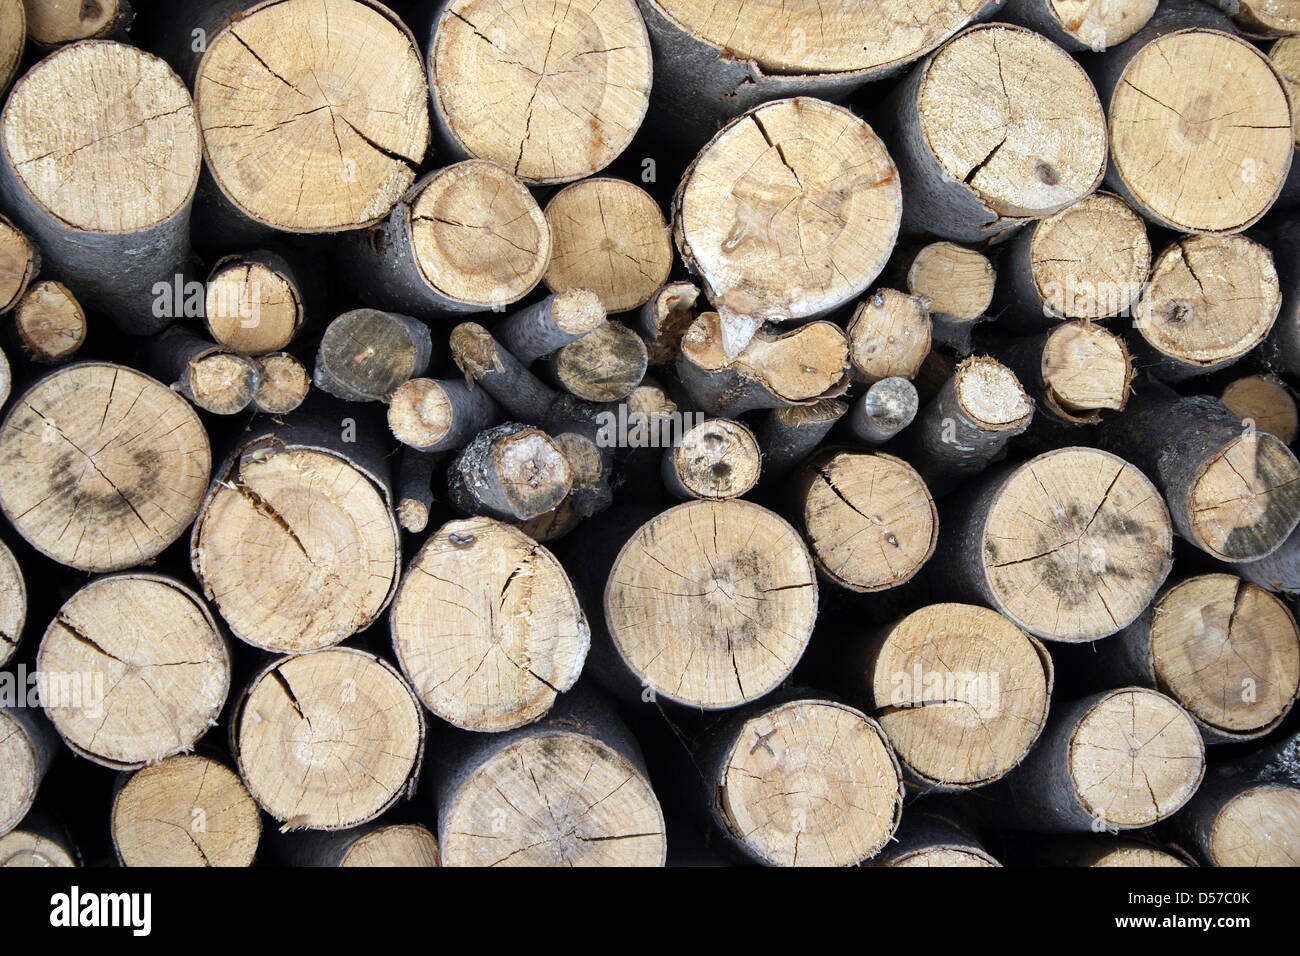 Pile of firewood – stacked wood logs of different sizes. Stock Photo